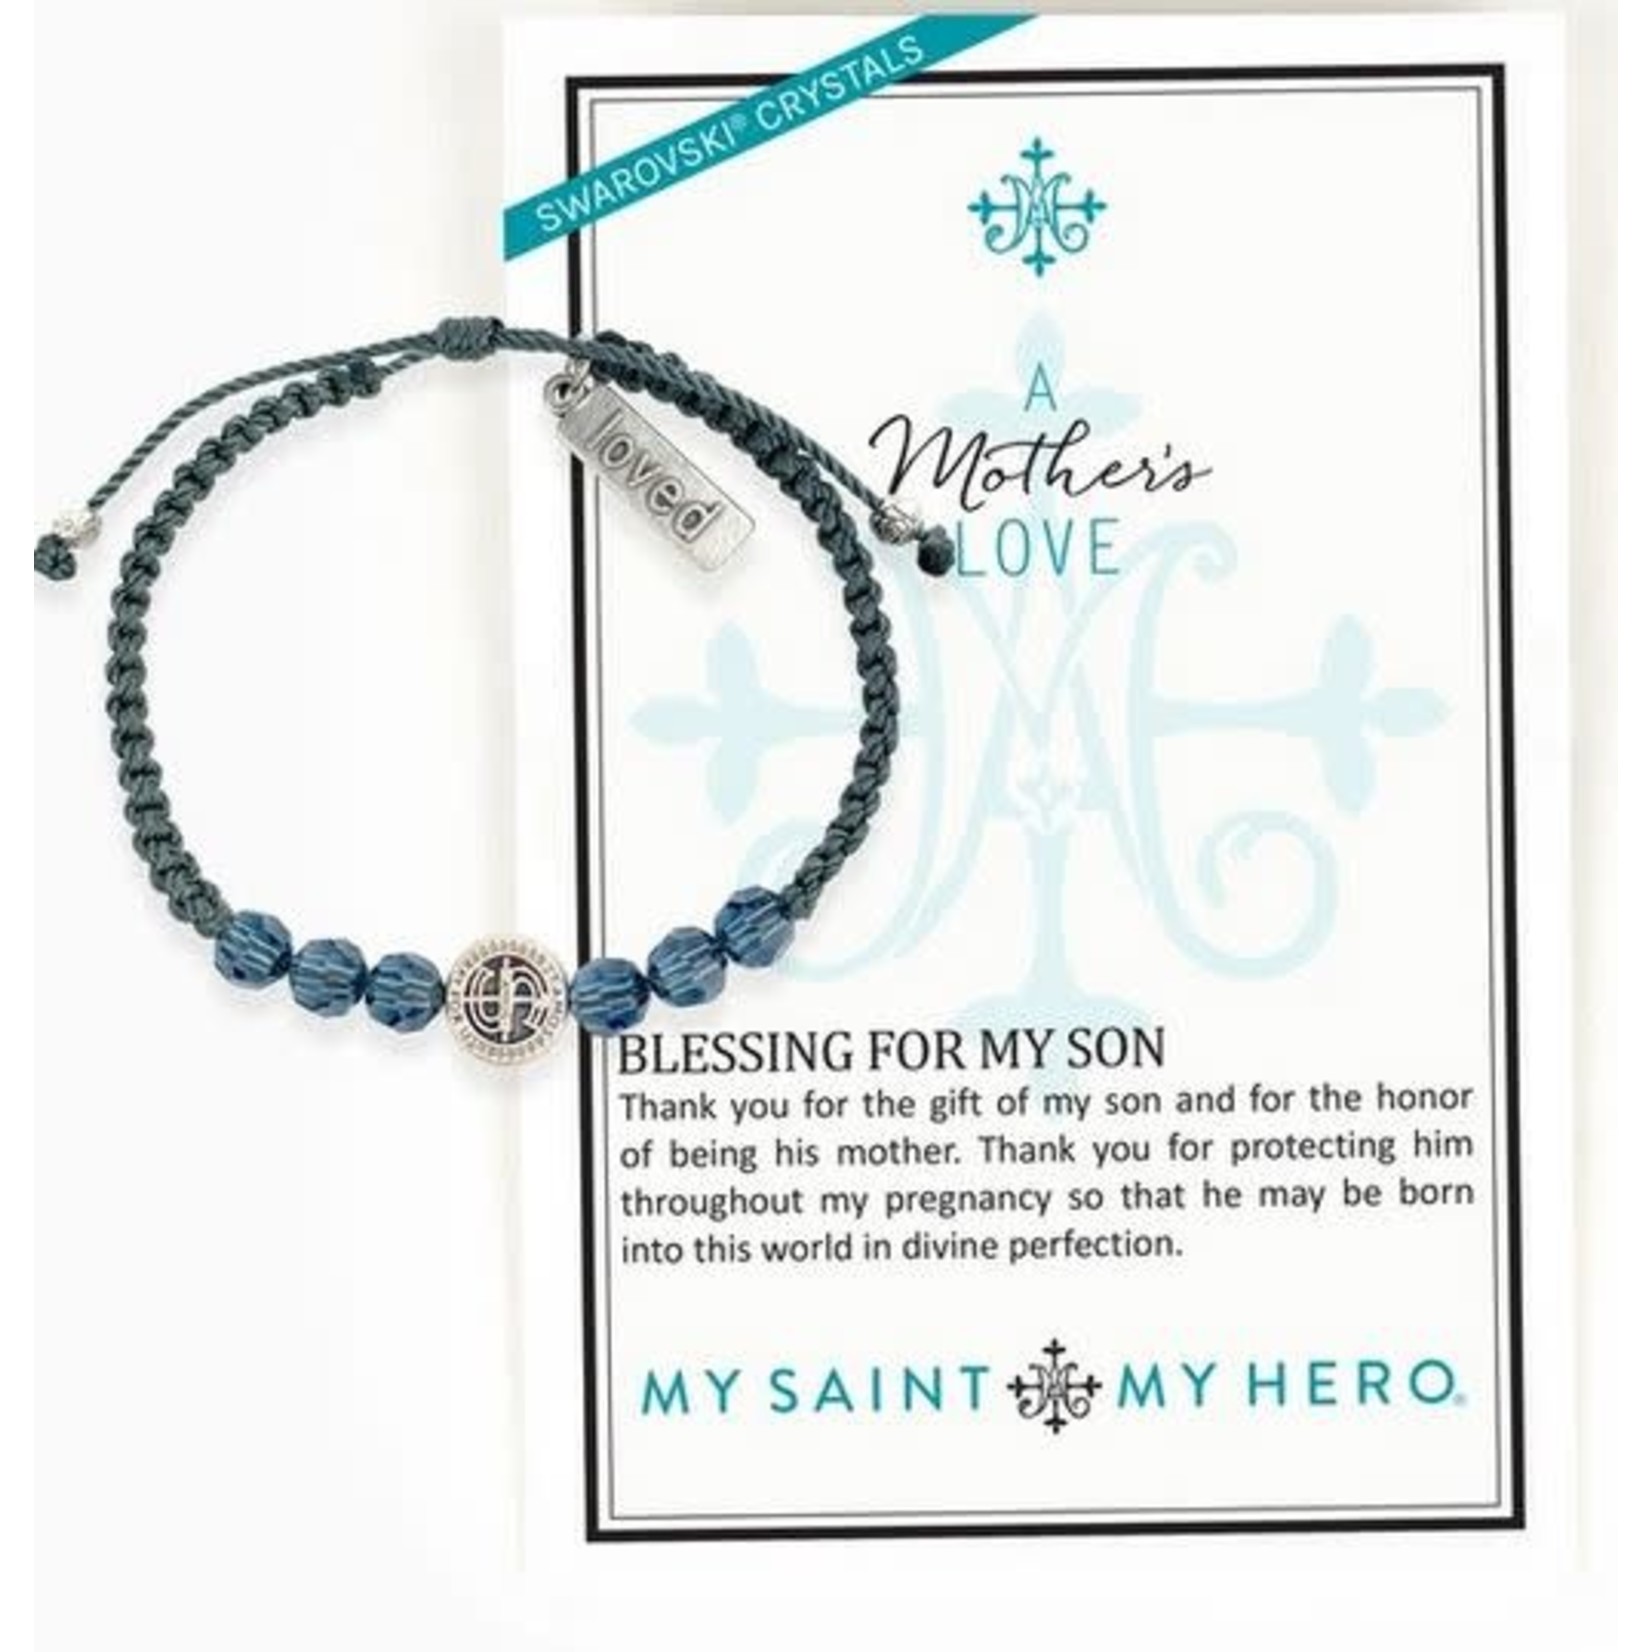 My Saint My Hero A Mother's Love For My Son Bracelet